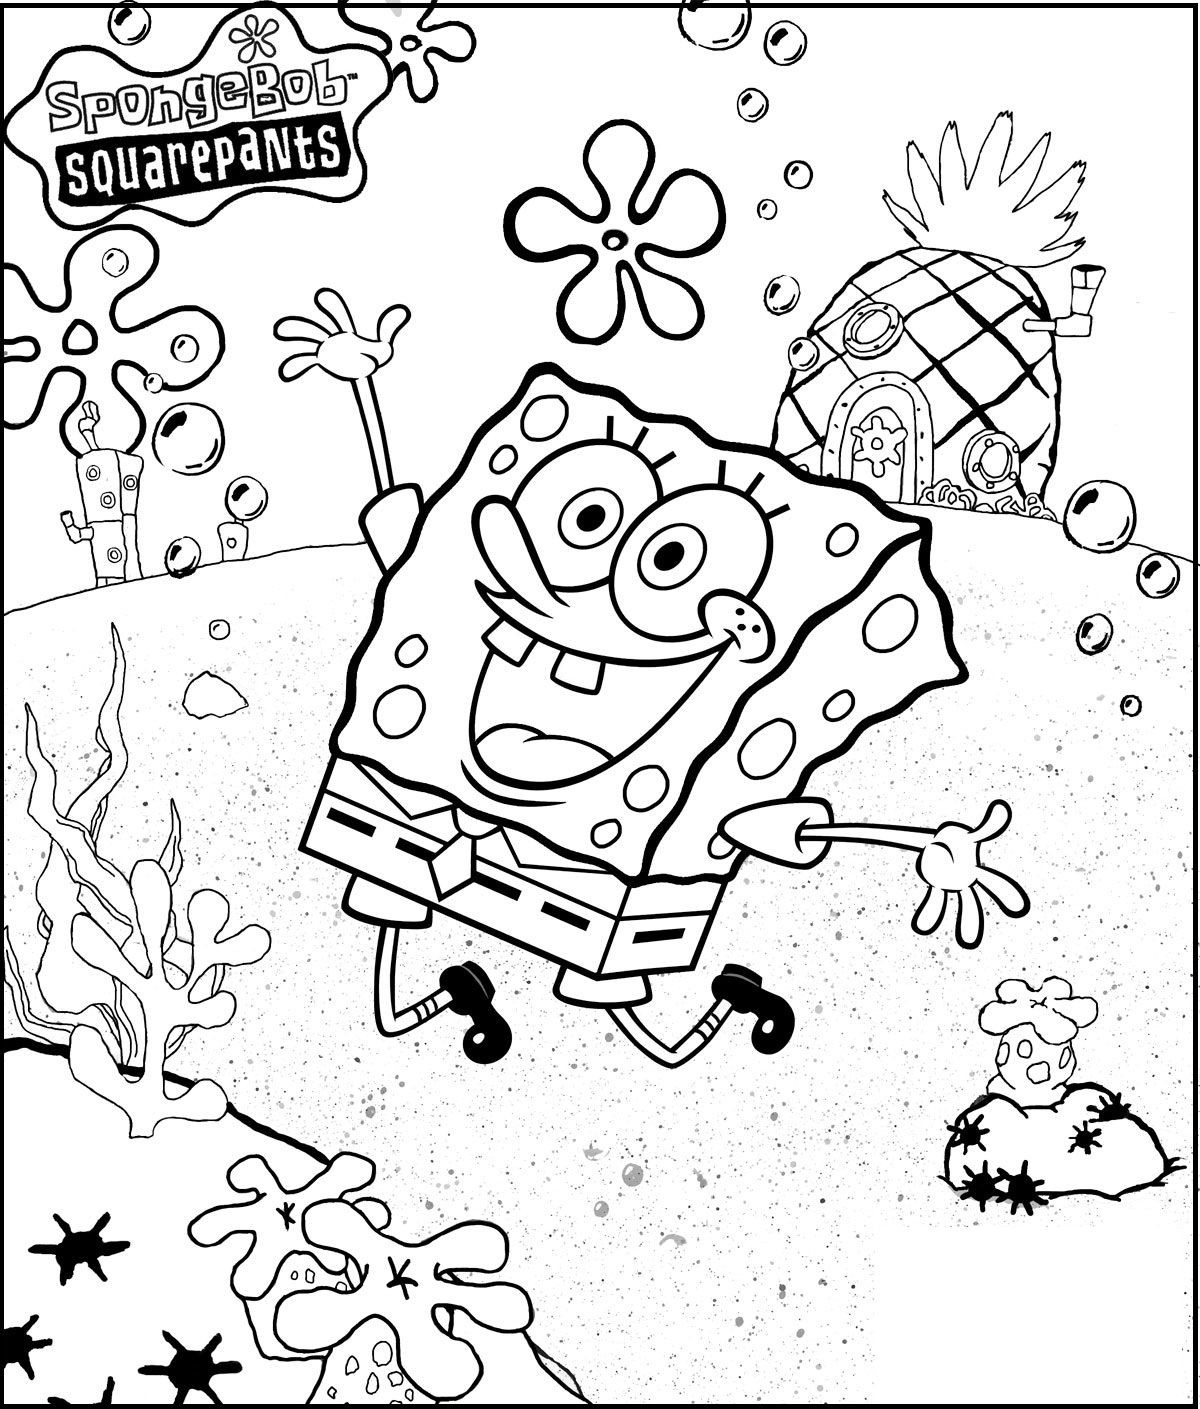 Spongebob Very Merry coloring picture for kids